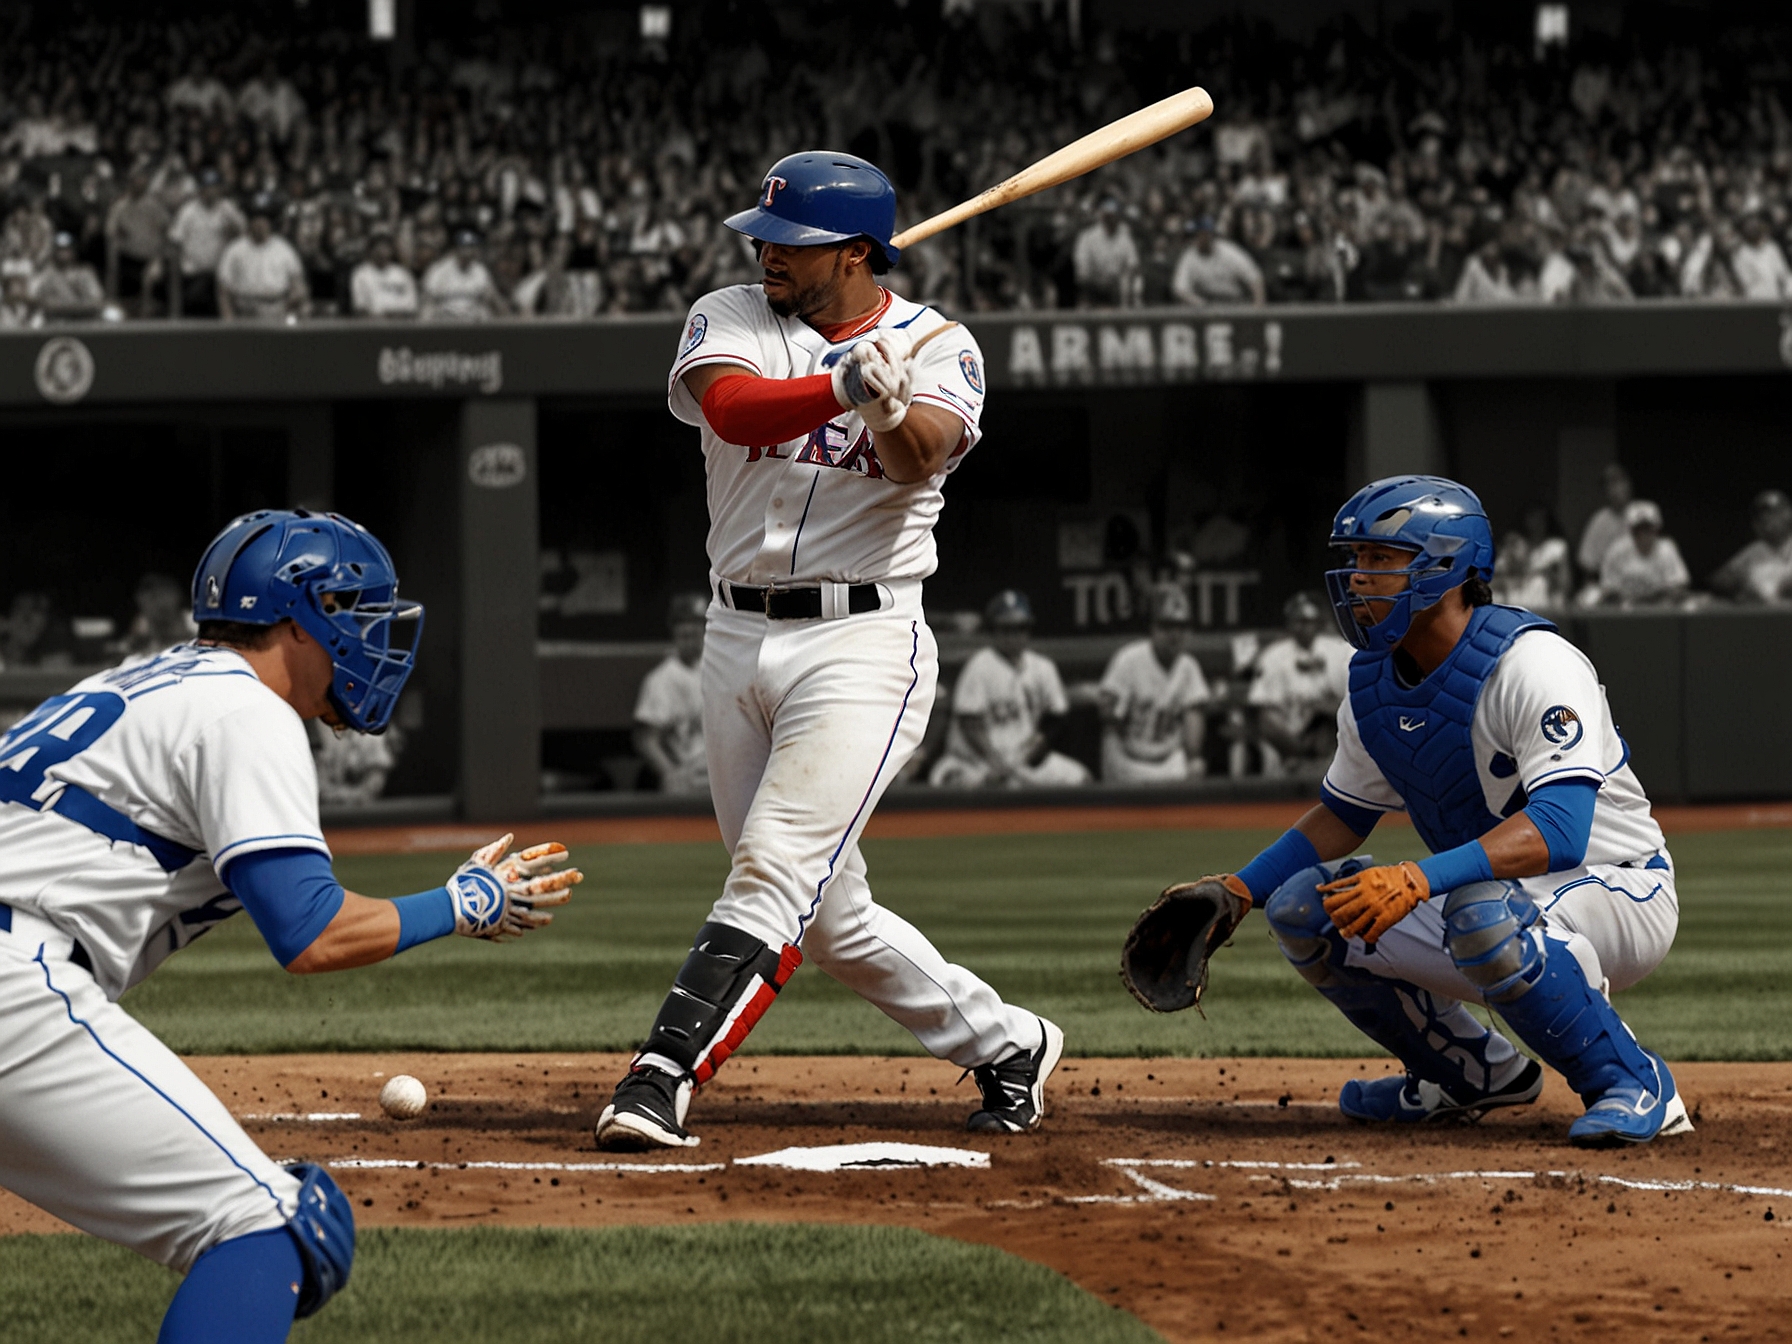 Texas Rangers' batter connects with a pitch, driving in one of the six runs in their dominant win over the Kansas City Royals. The image highlights the contrast in offensive execution between the two teams.